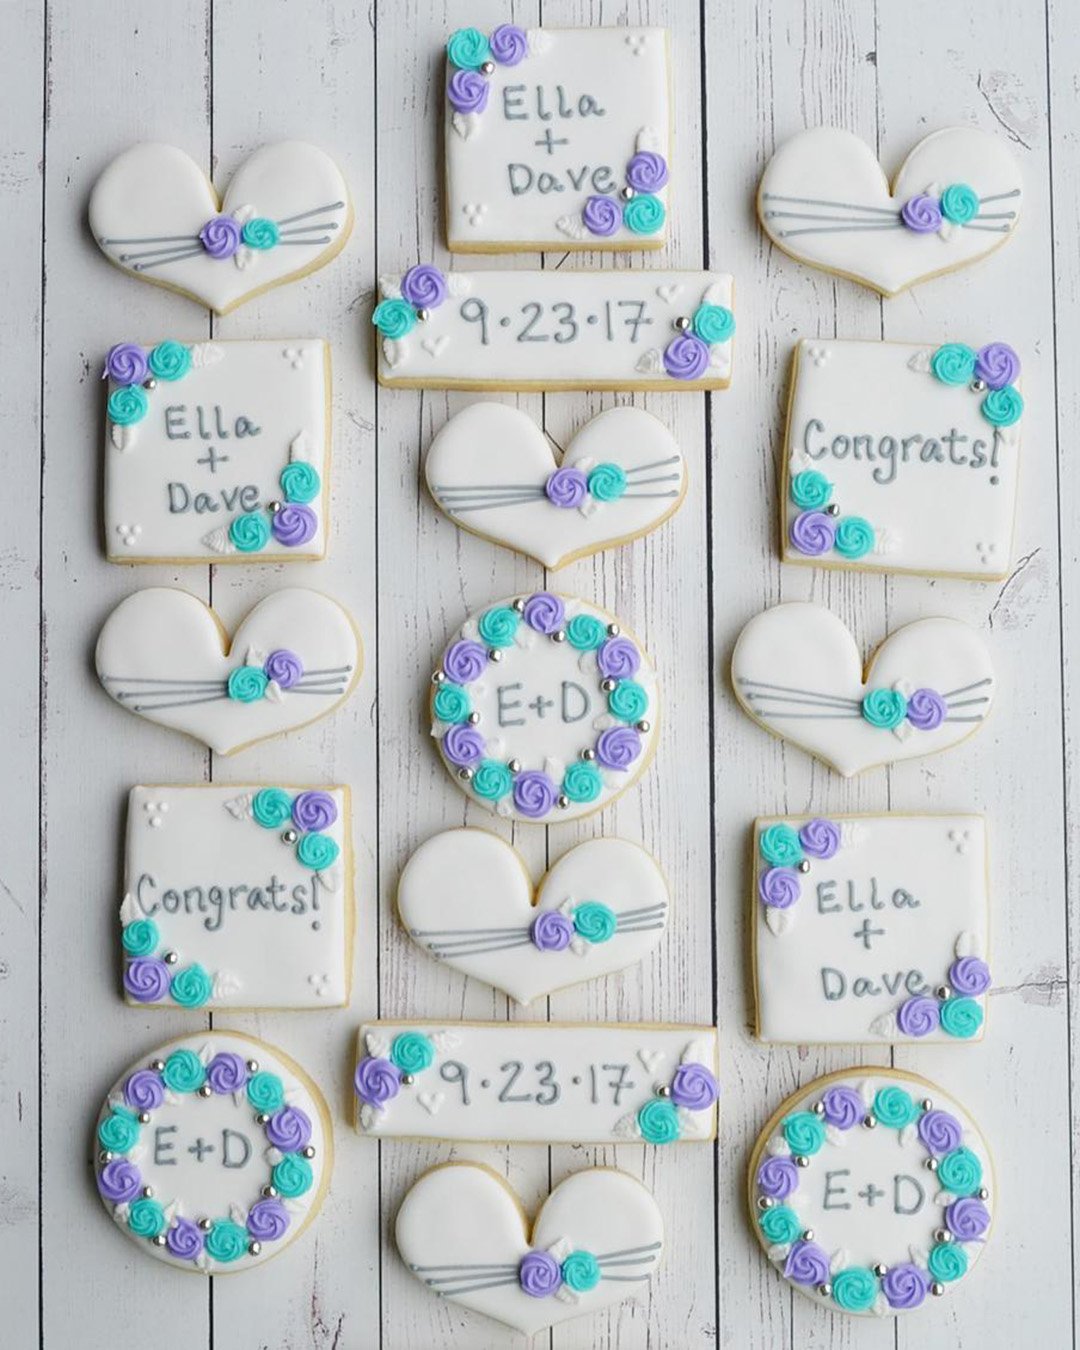 wedding cake cookies cute white with lilac blue roses vjscookies